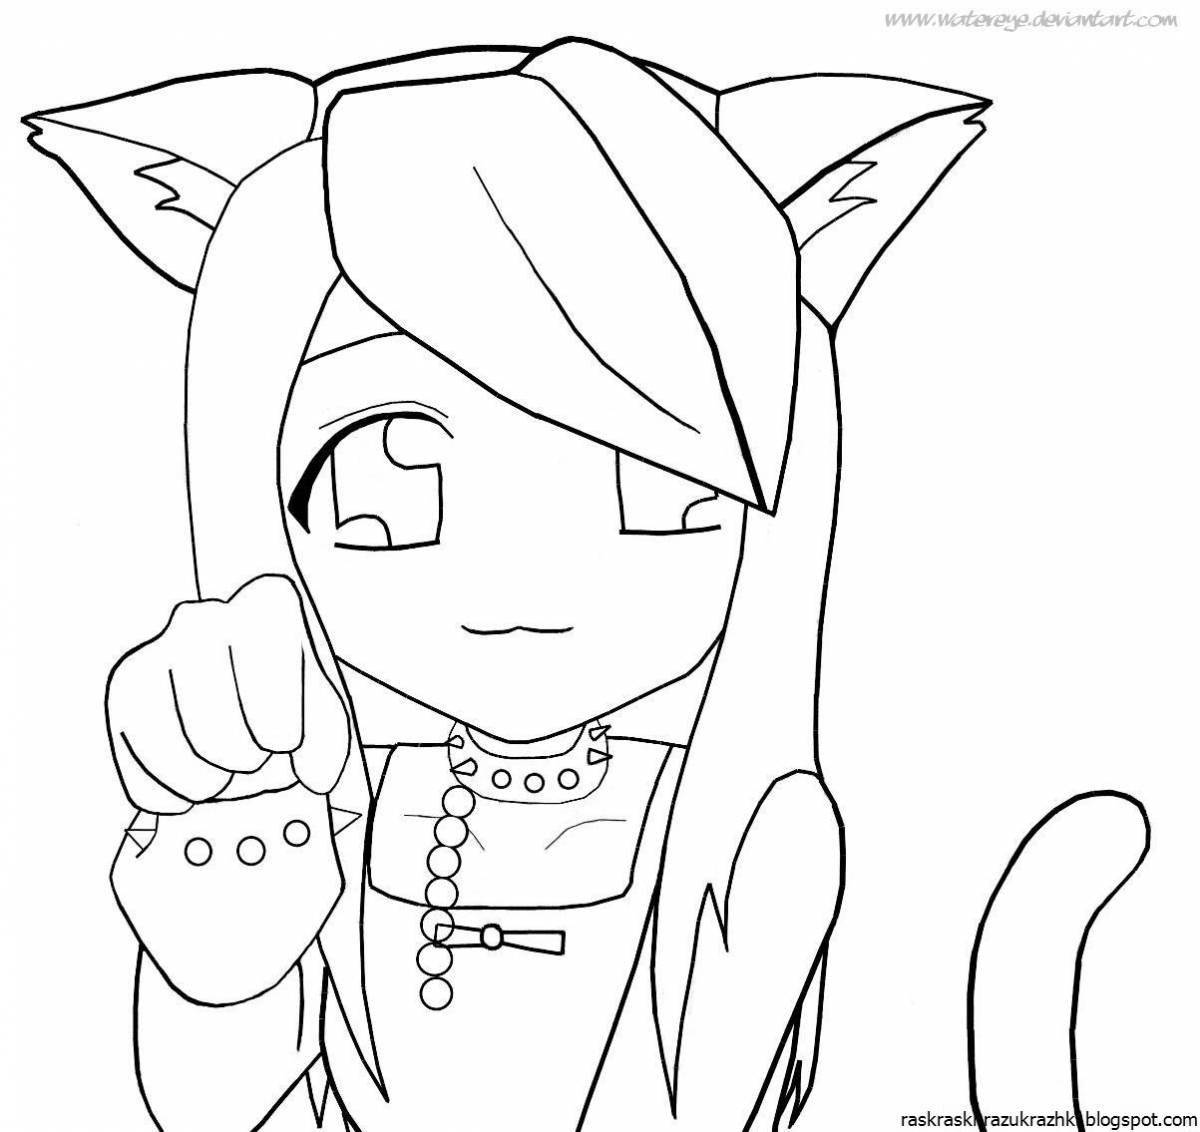 Playful anime coloring book